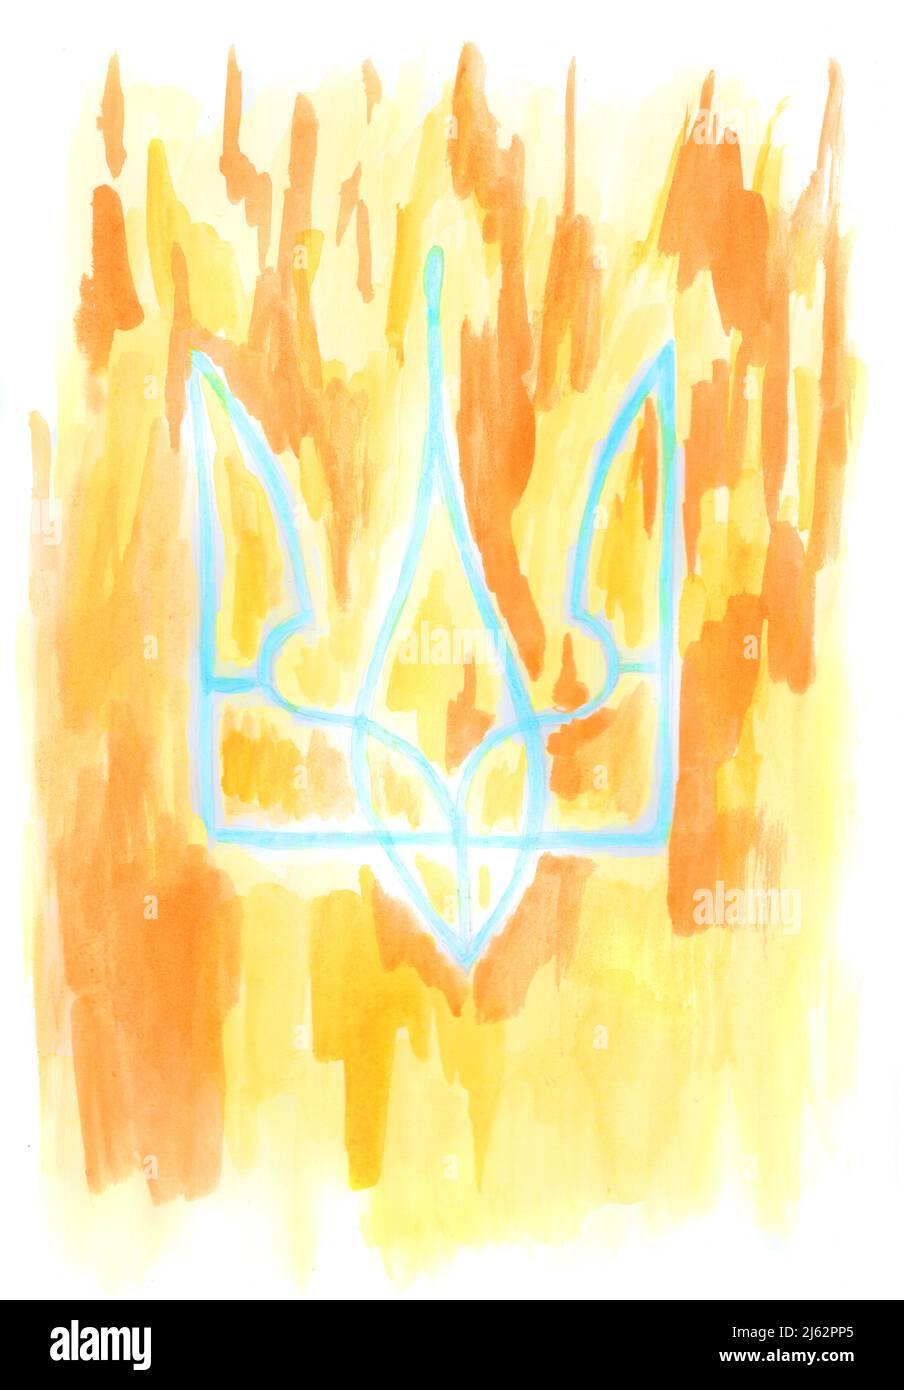 Burning Ukrainian coat of arms. The symbol of Ukraine is on fire. Color watercolor painting conceptual Stock Photo